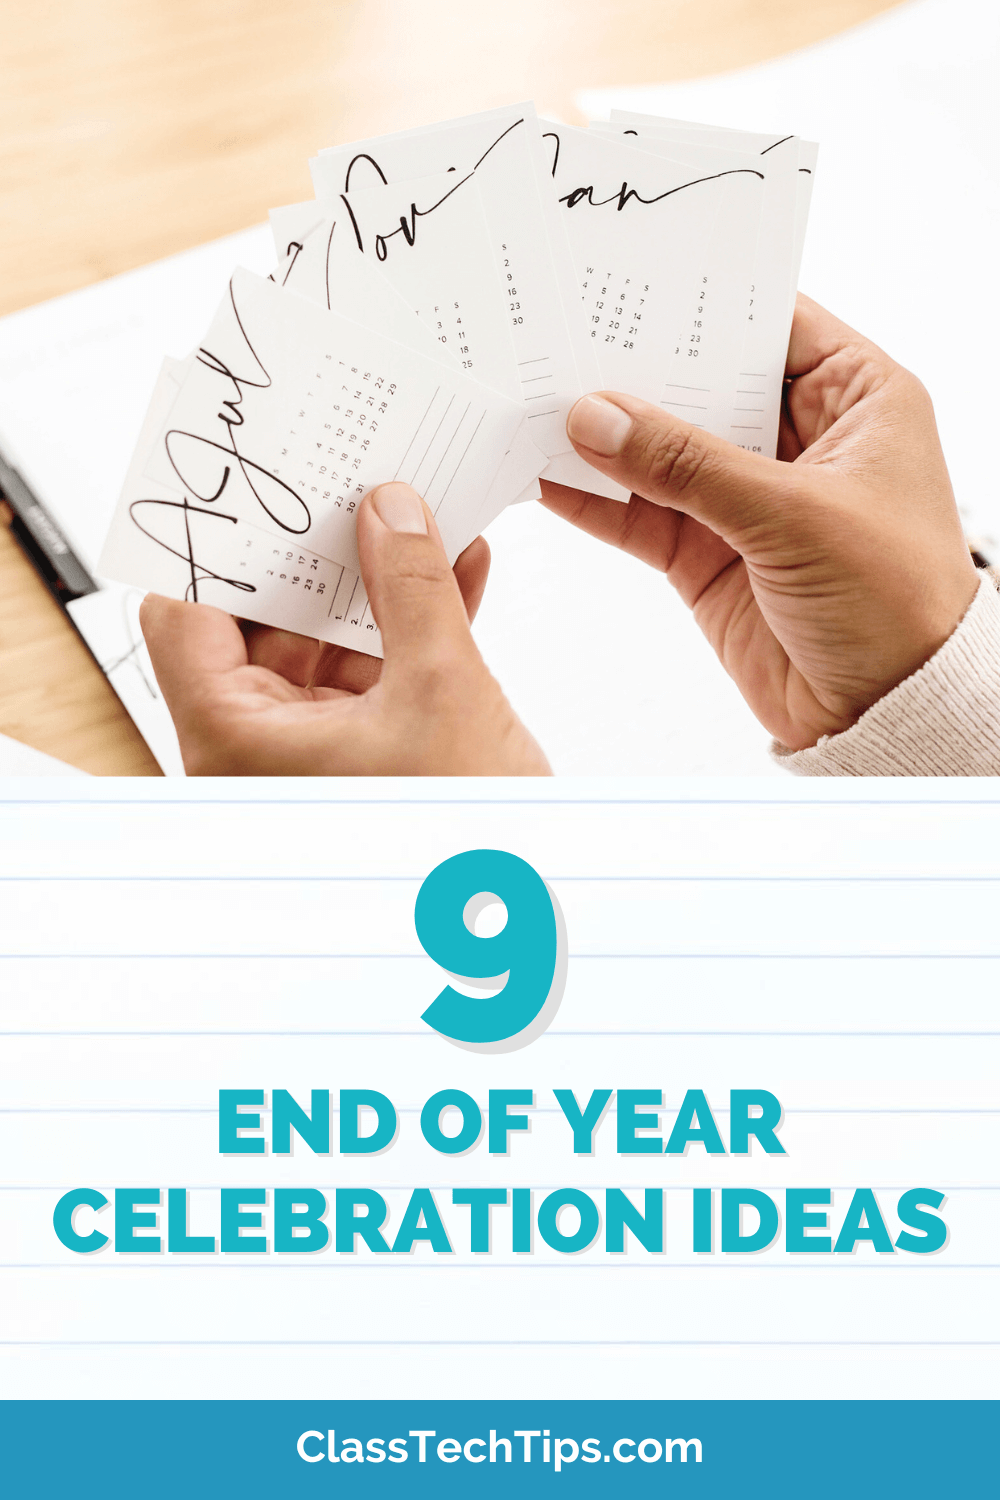 Close-up of teacher hands riffling through calendar cards with script handwriting, set against a background with text "9 End of Year Celebration Ideas."